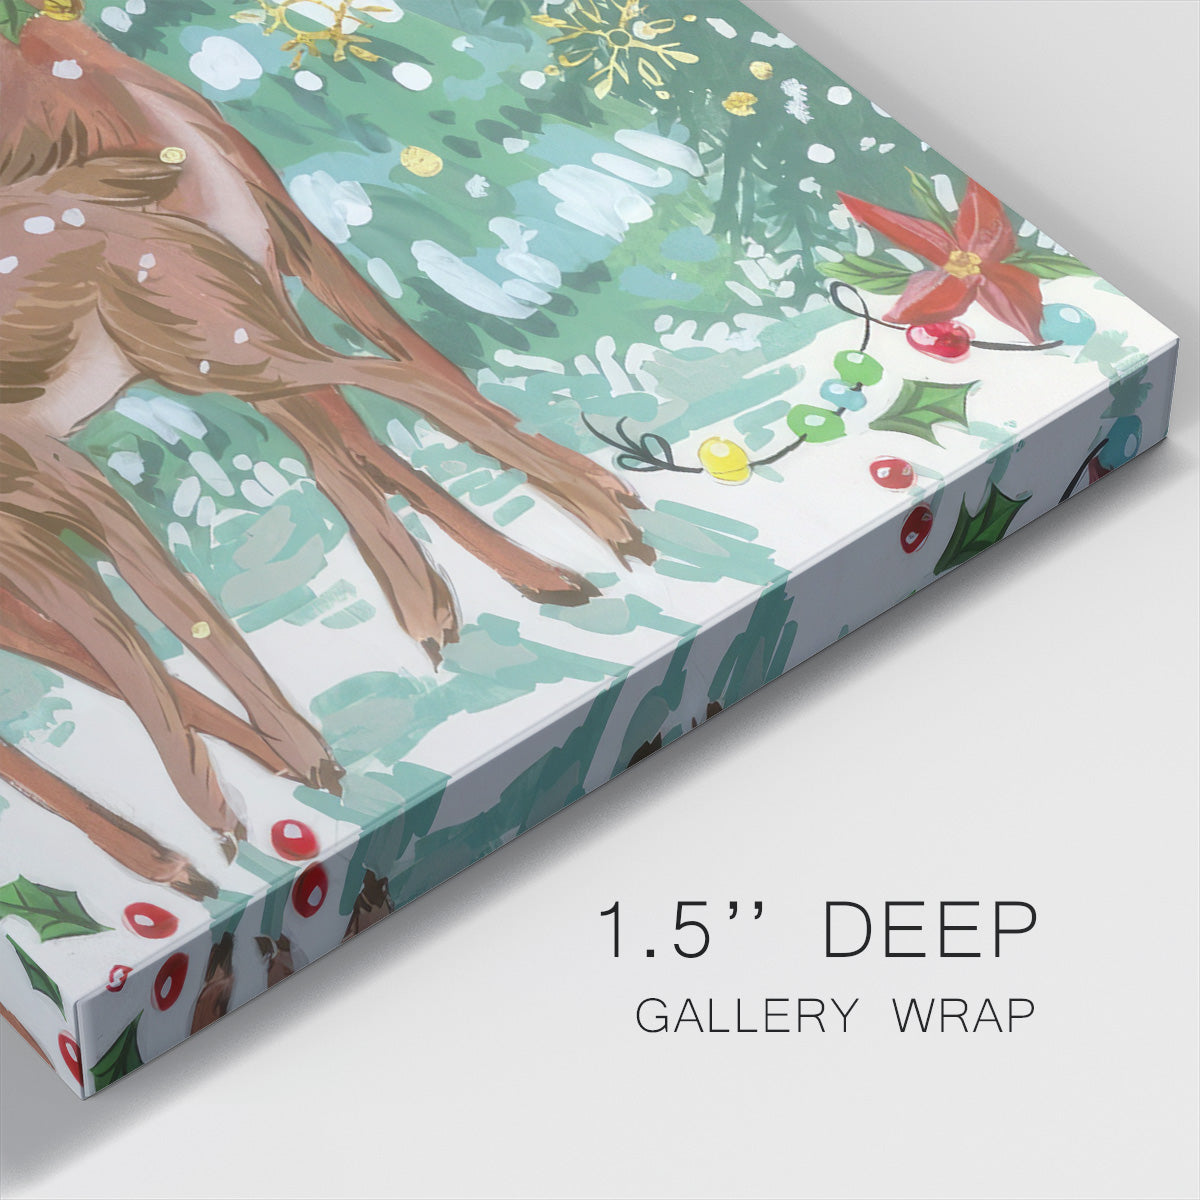 Doe and Fawn II - Gallery Wrapped Canvas